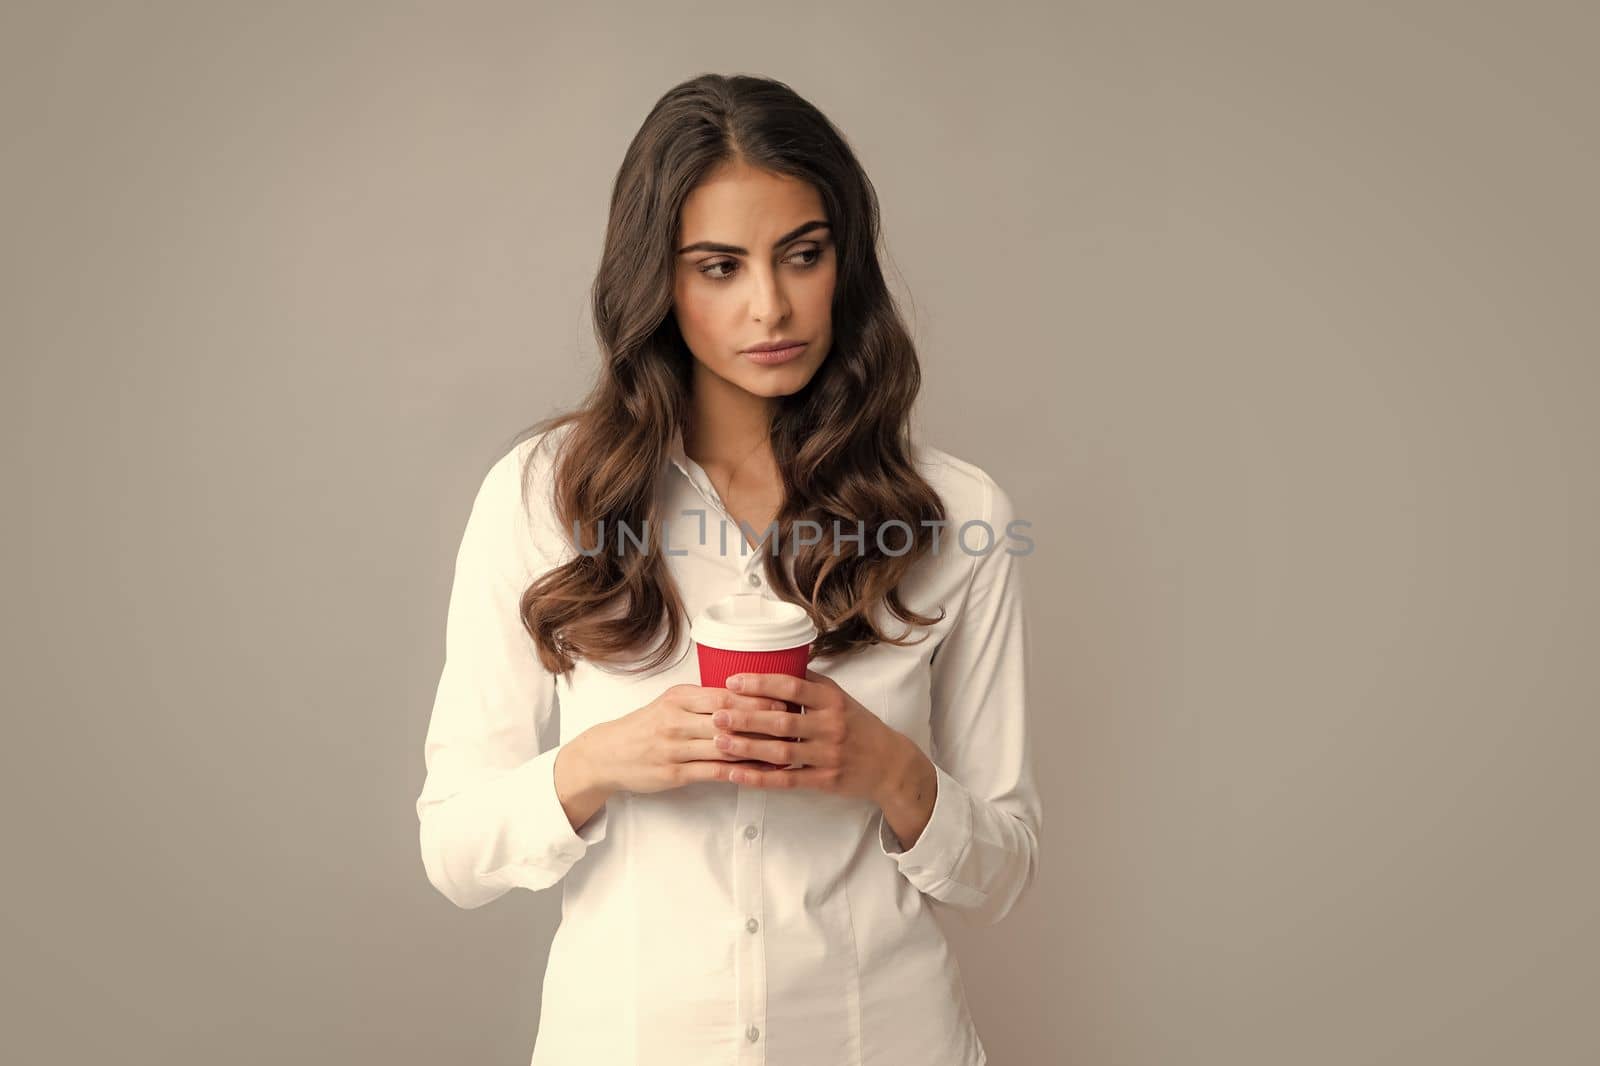 Portrait of a beautiful young woman with a cup of coffee standing on the gray background